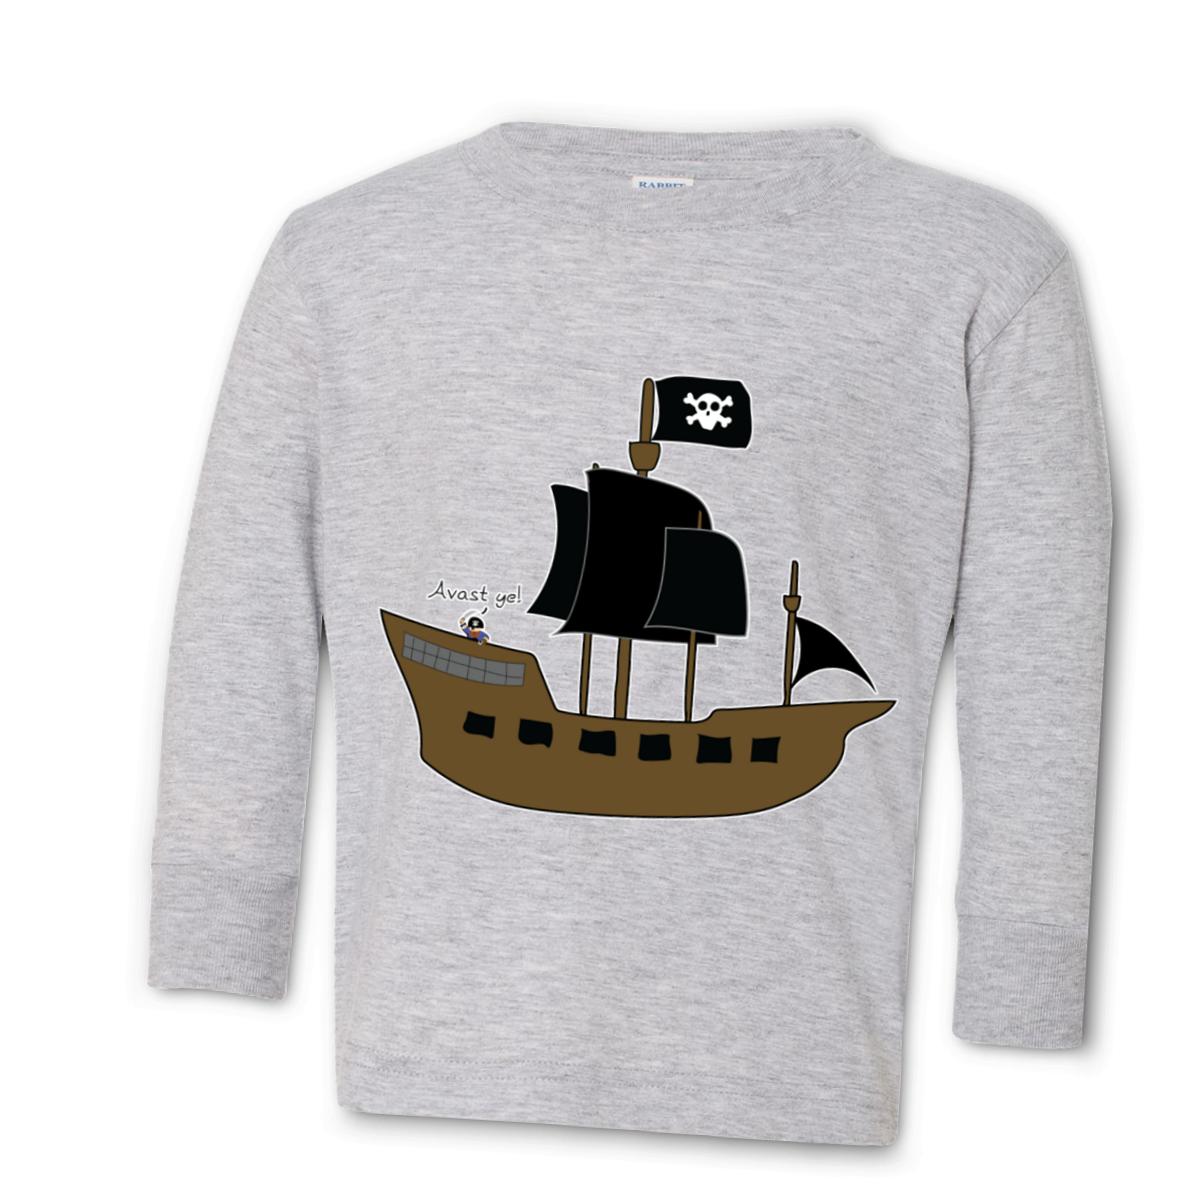 Pirate Ship Toddler Long Sleeve Tee 4T heather